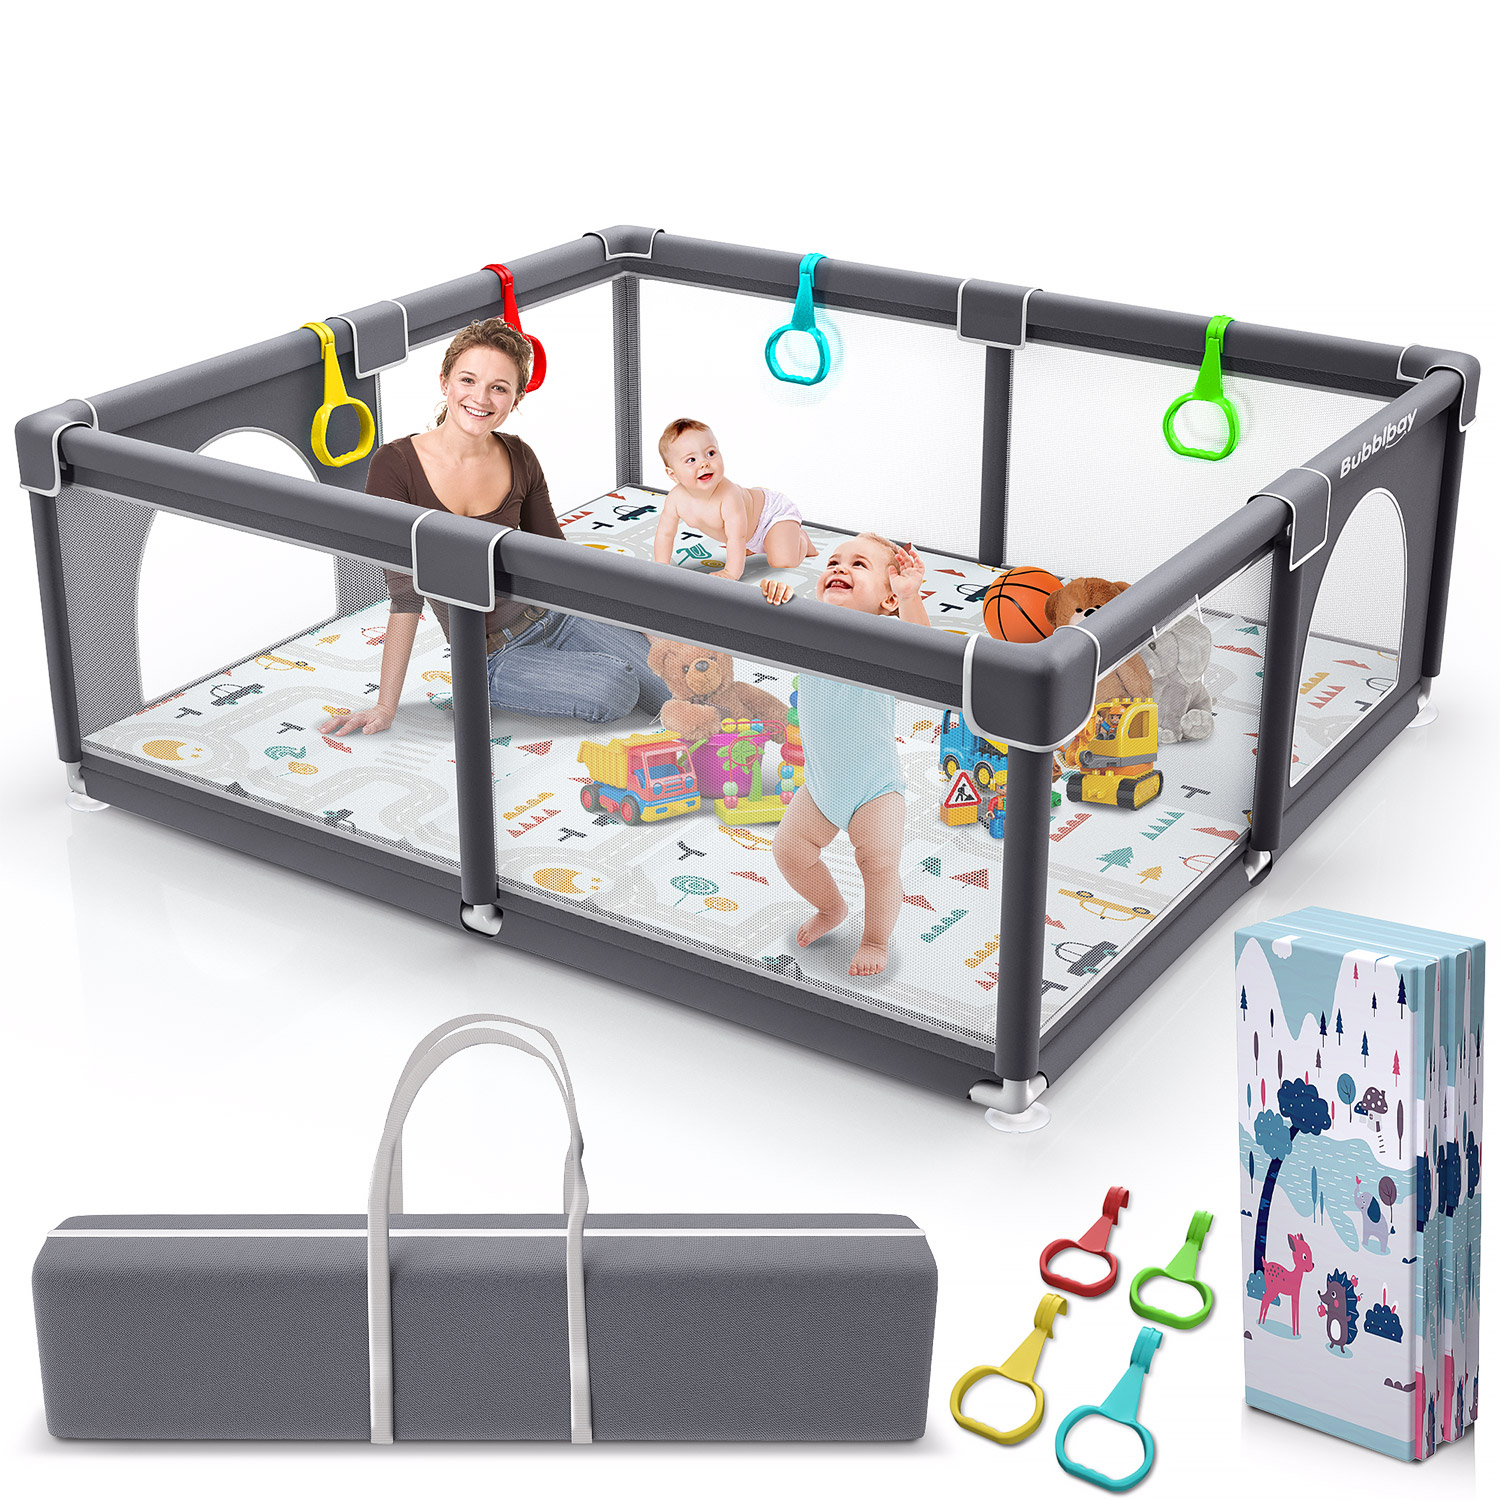 Campmoy Baby Playpen, 79x71", Indoor & Outdoor Kids Activity Play Yard with Gate - image 1 of 7